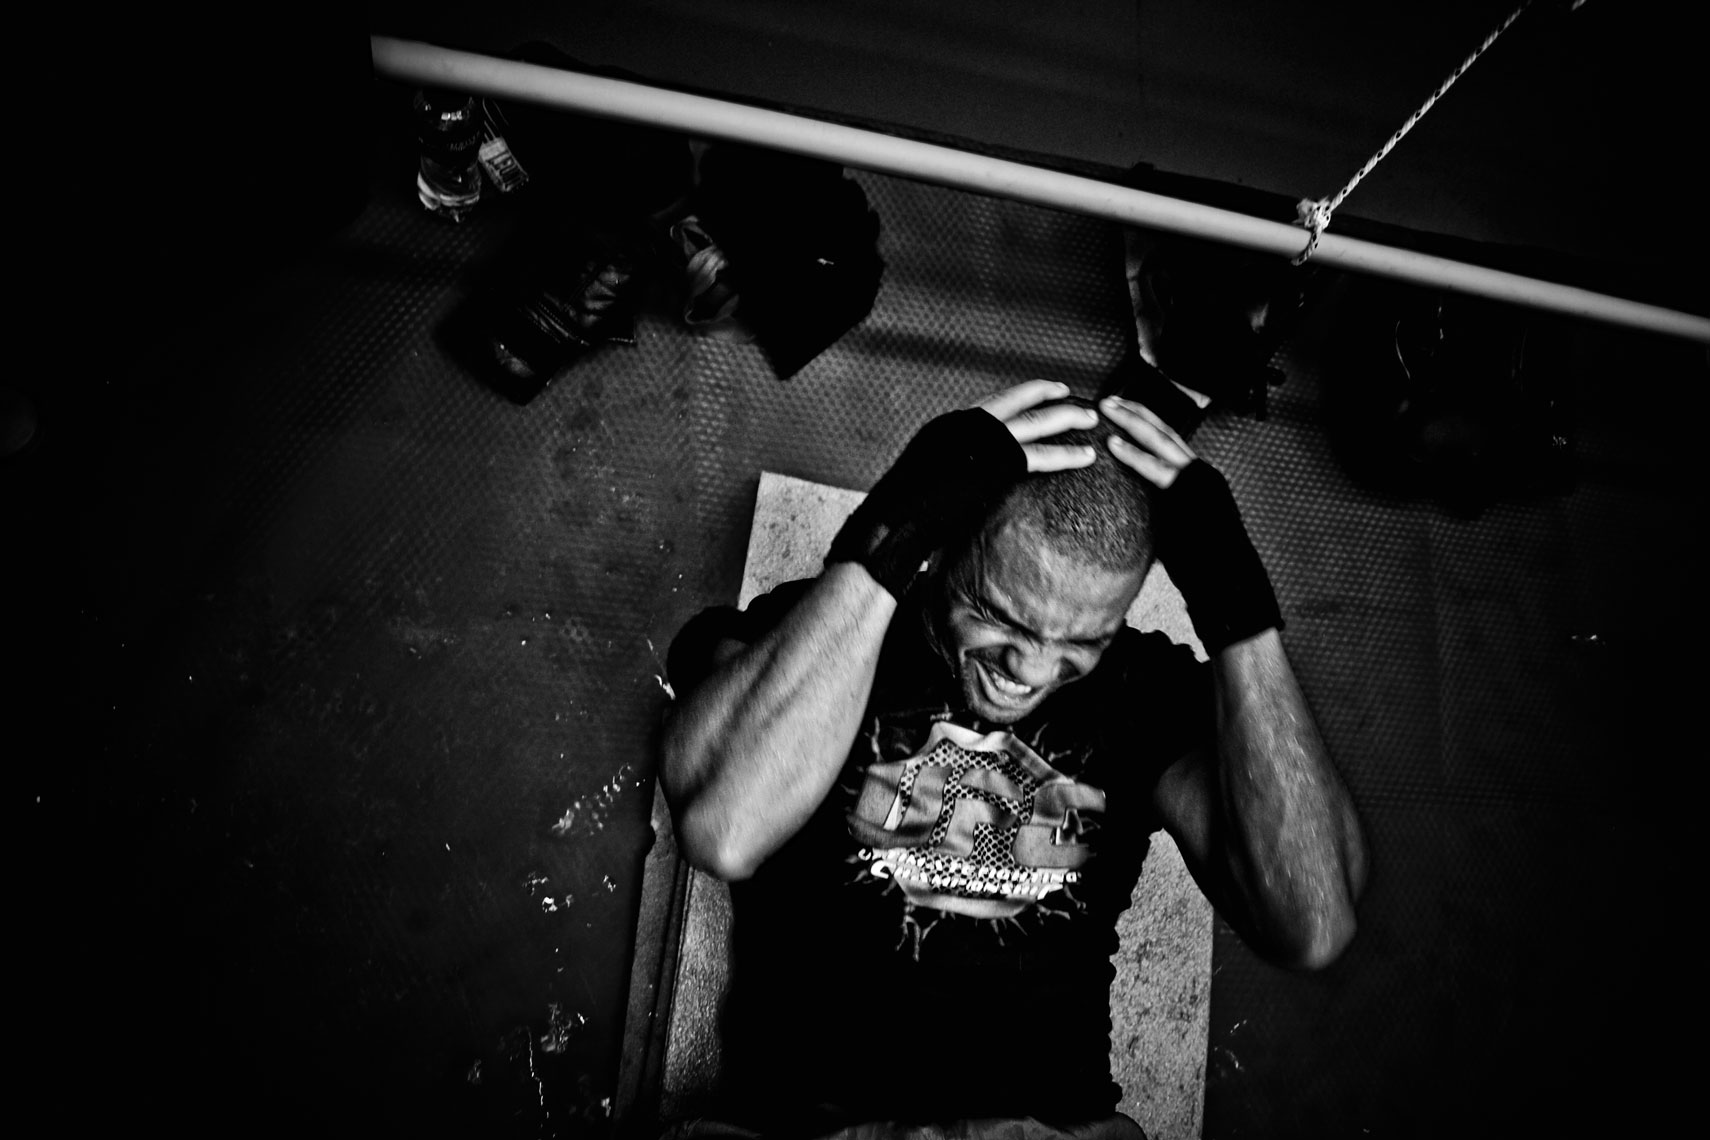 ITALY. Florence, 6th October 2011. Leonard Bundu during the training  in preparation of the match for the EBU (European Boxing Union) Welter Weight crown.